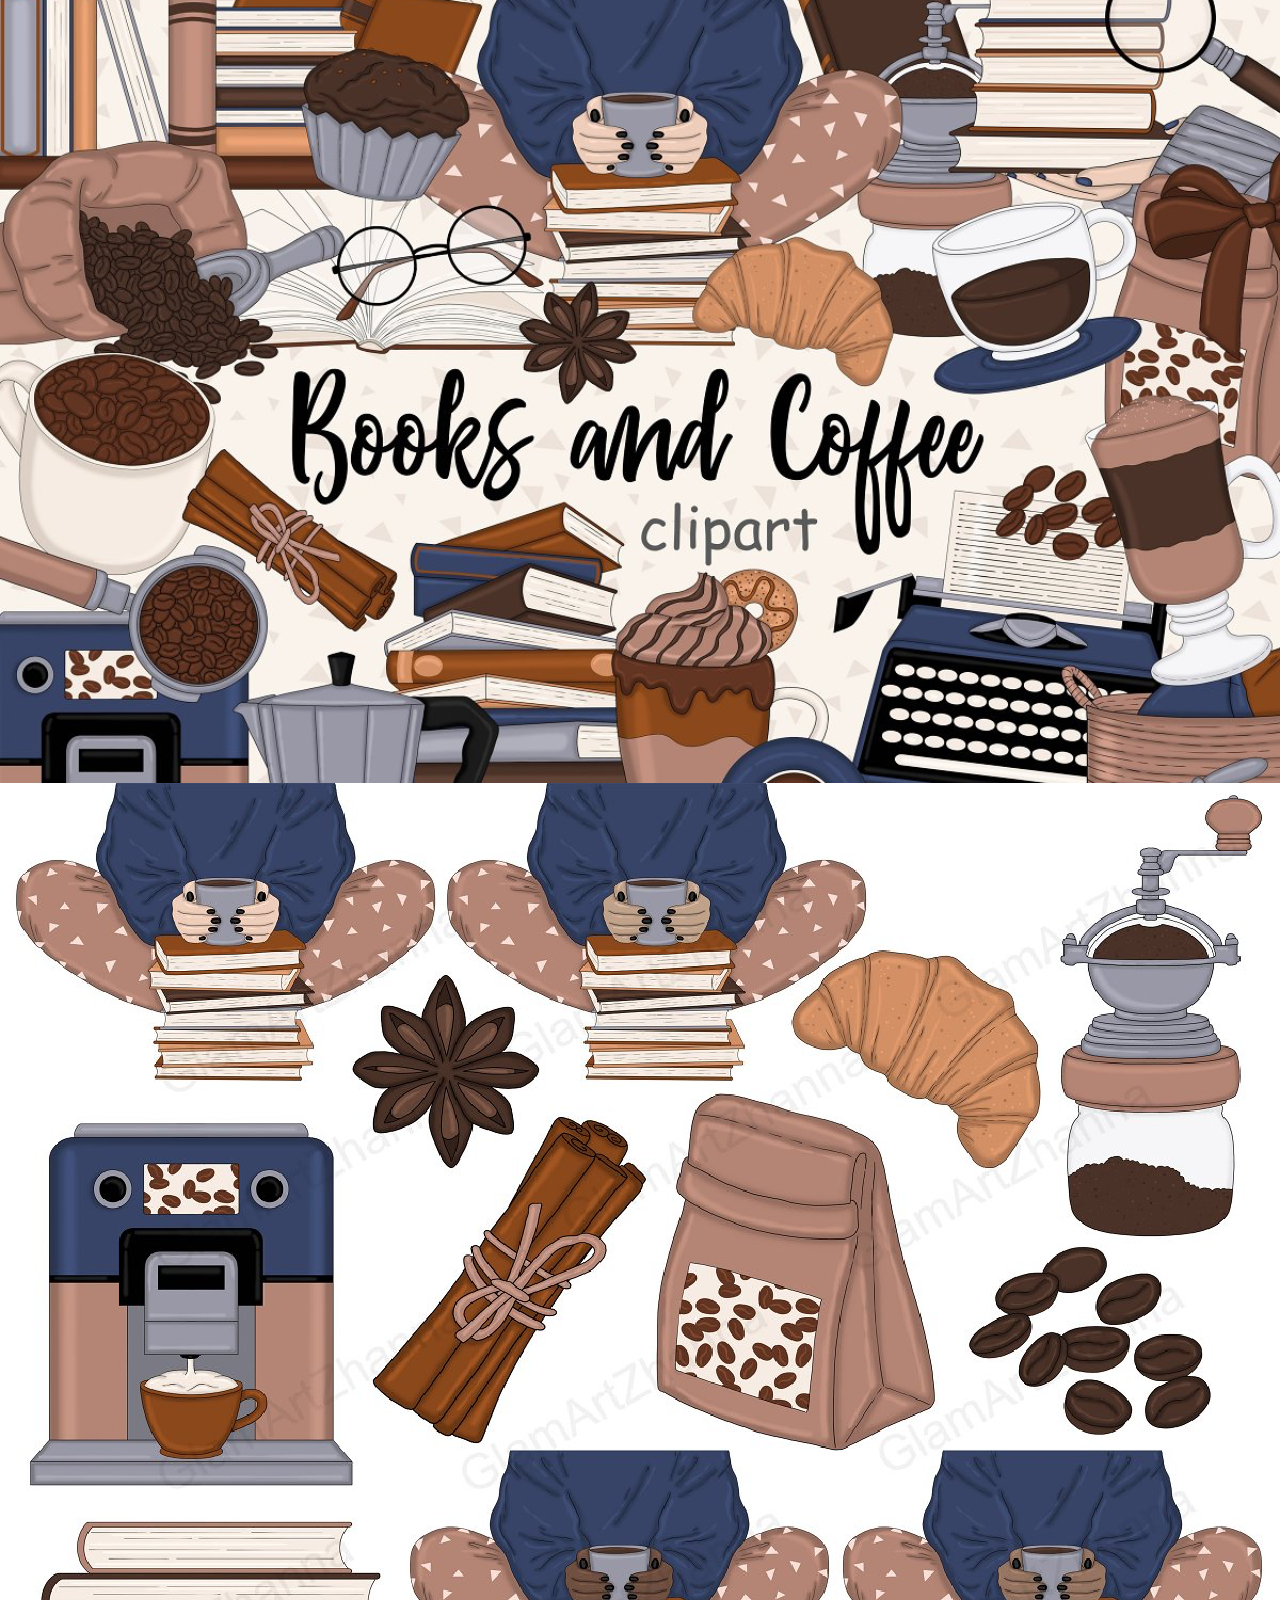 Books and coffee clipart pinterest image preview.